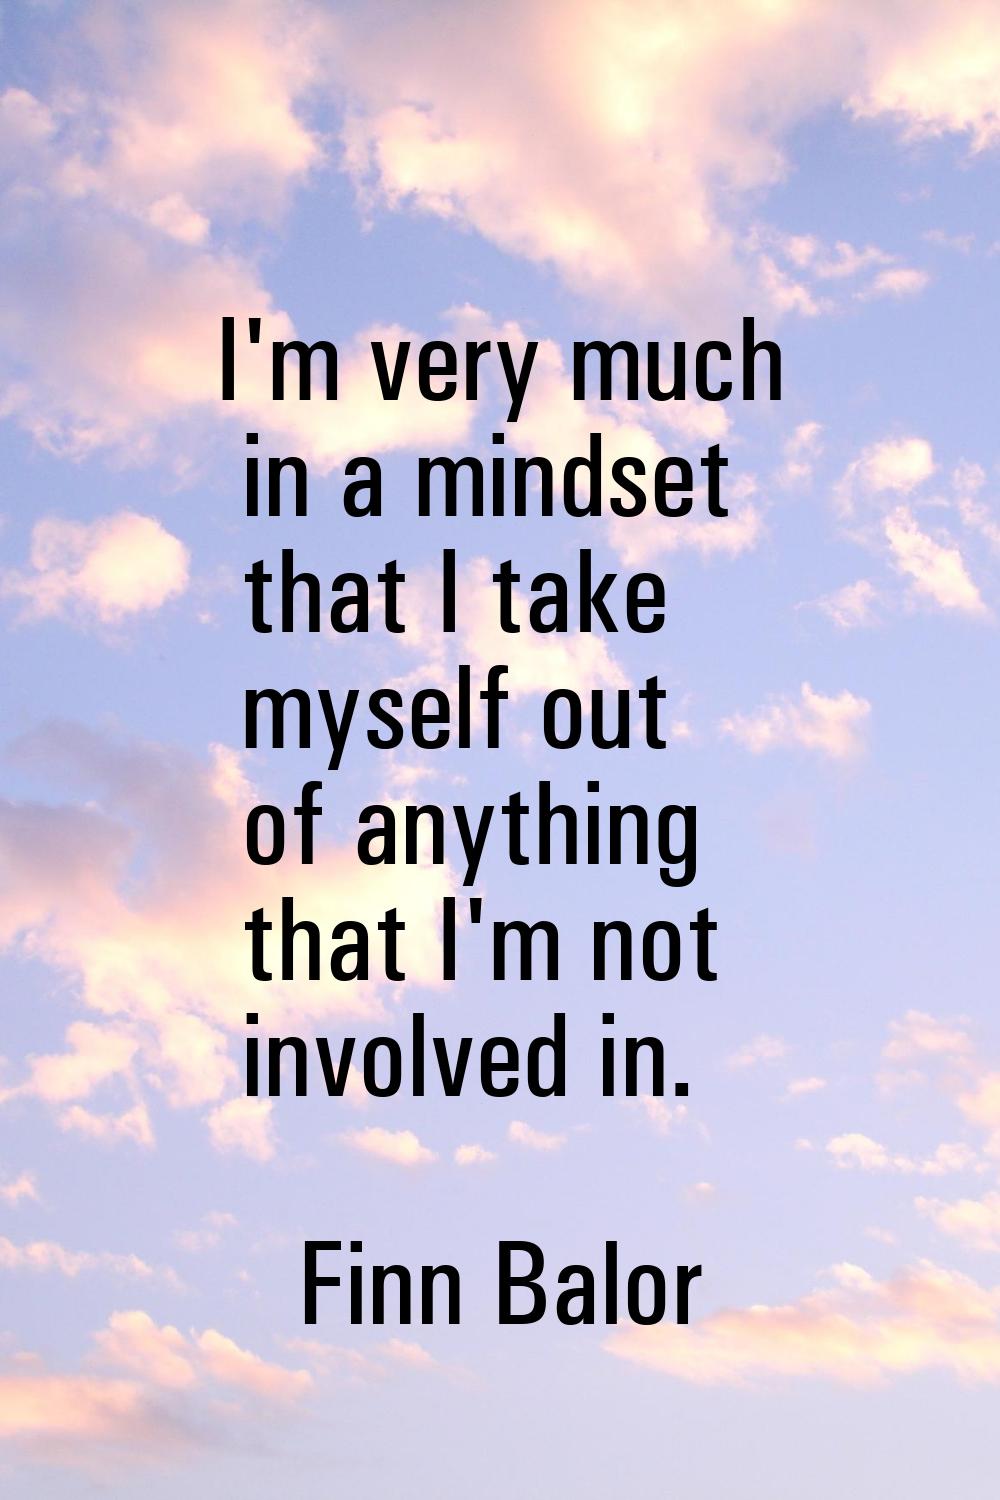 I'm very much in a mindset that I take myself out of anything that I'm not involved in.